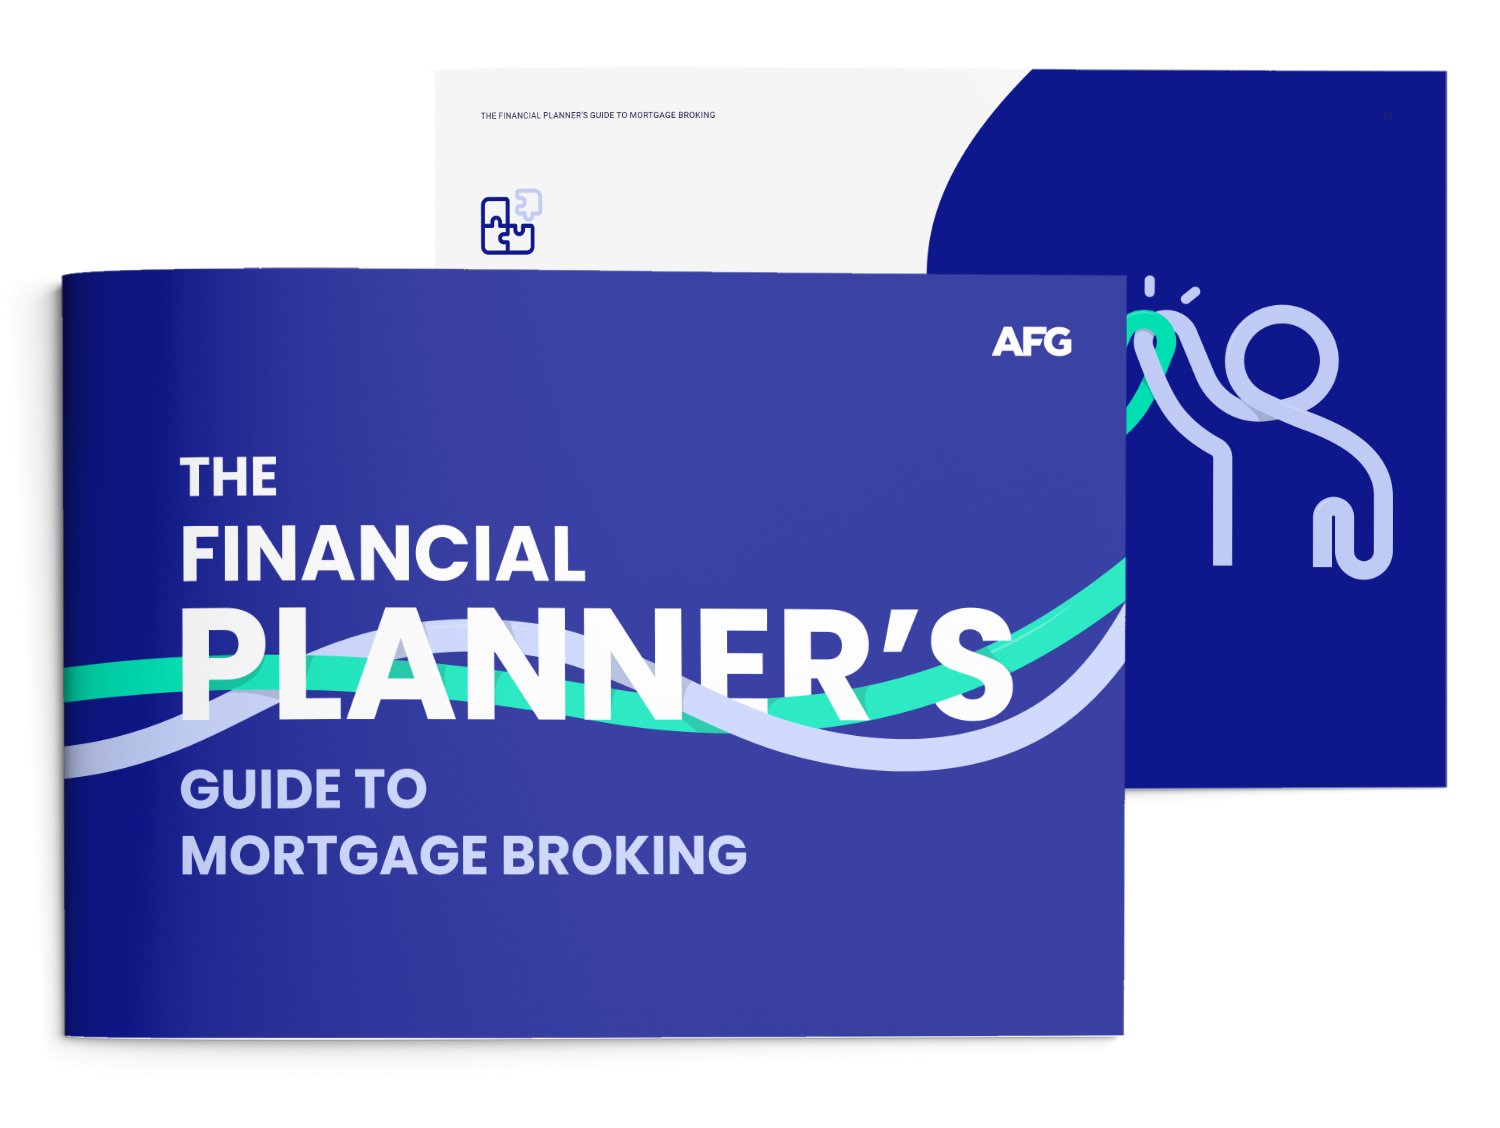 The Financial Planner's Guide to Mortgage Broking